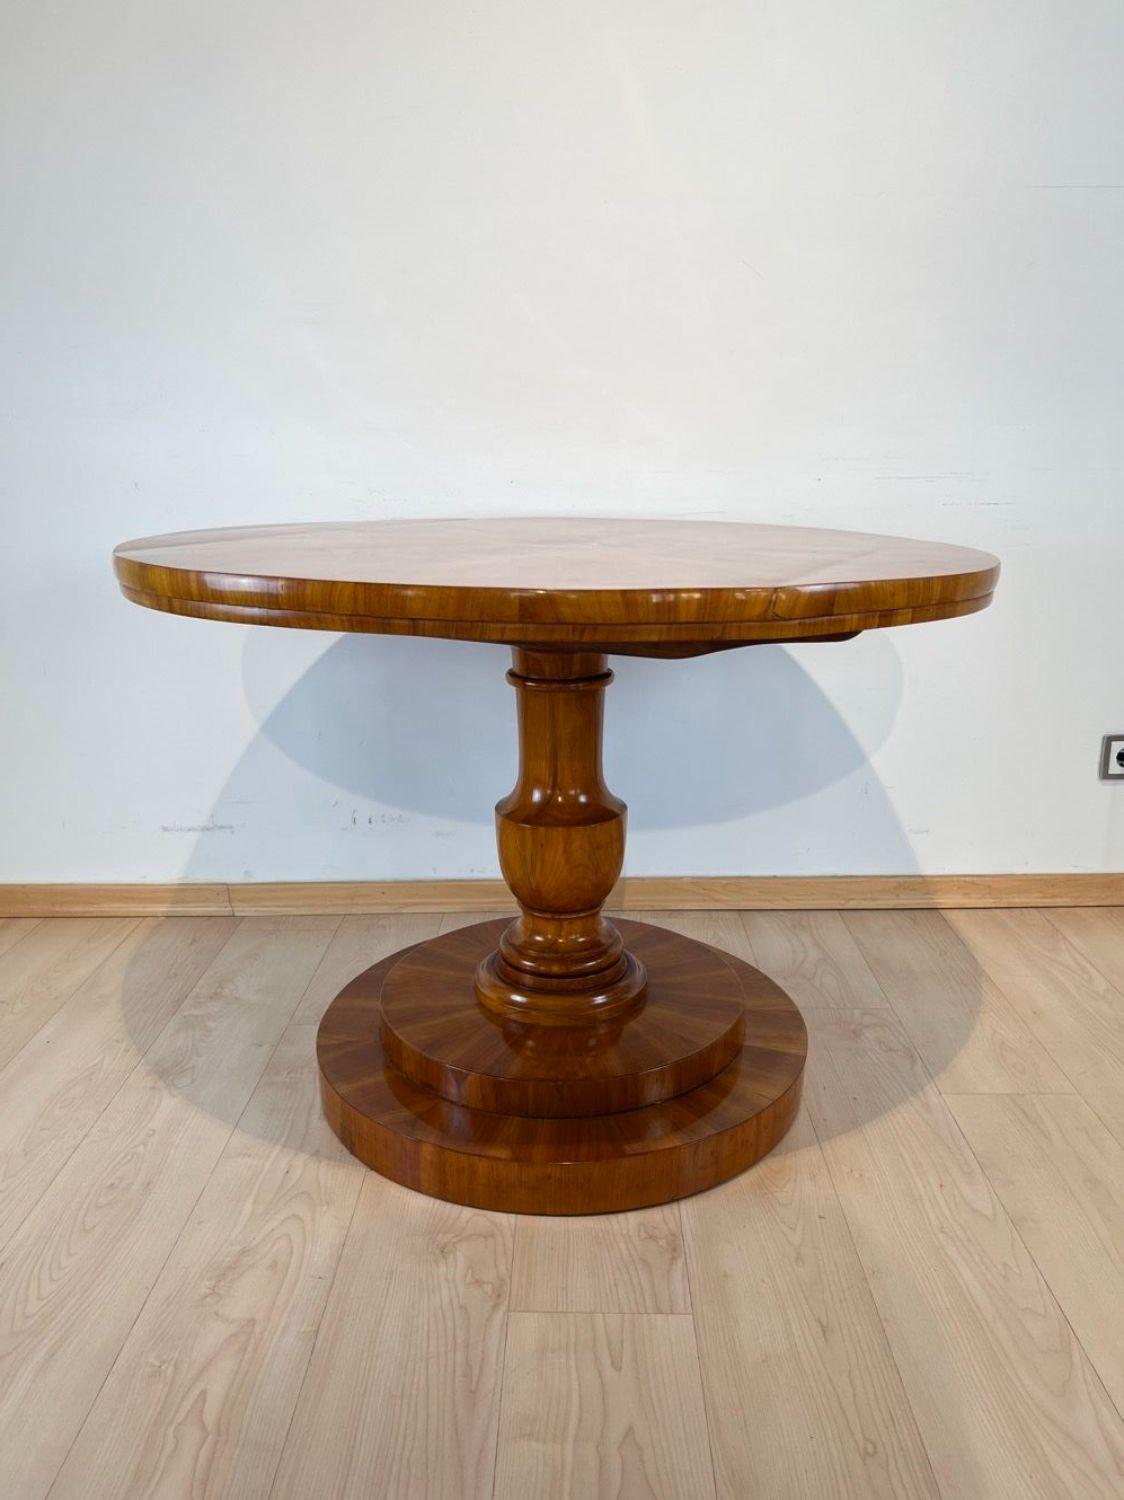 Elegant round Biedermeier Center Table from Austria, Vienna around 1830.

Star-shaped cherry veneer on softwood top with round ebony inlaid in the center. Pedestal carved from solid cherry wood.
Beautiful cherry veneer ion the tiered base.

Plate